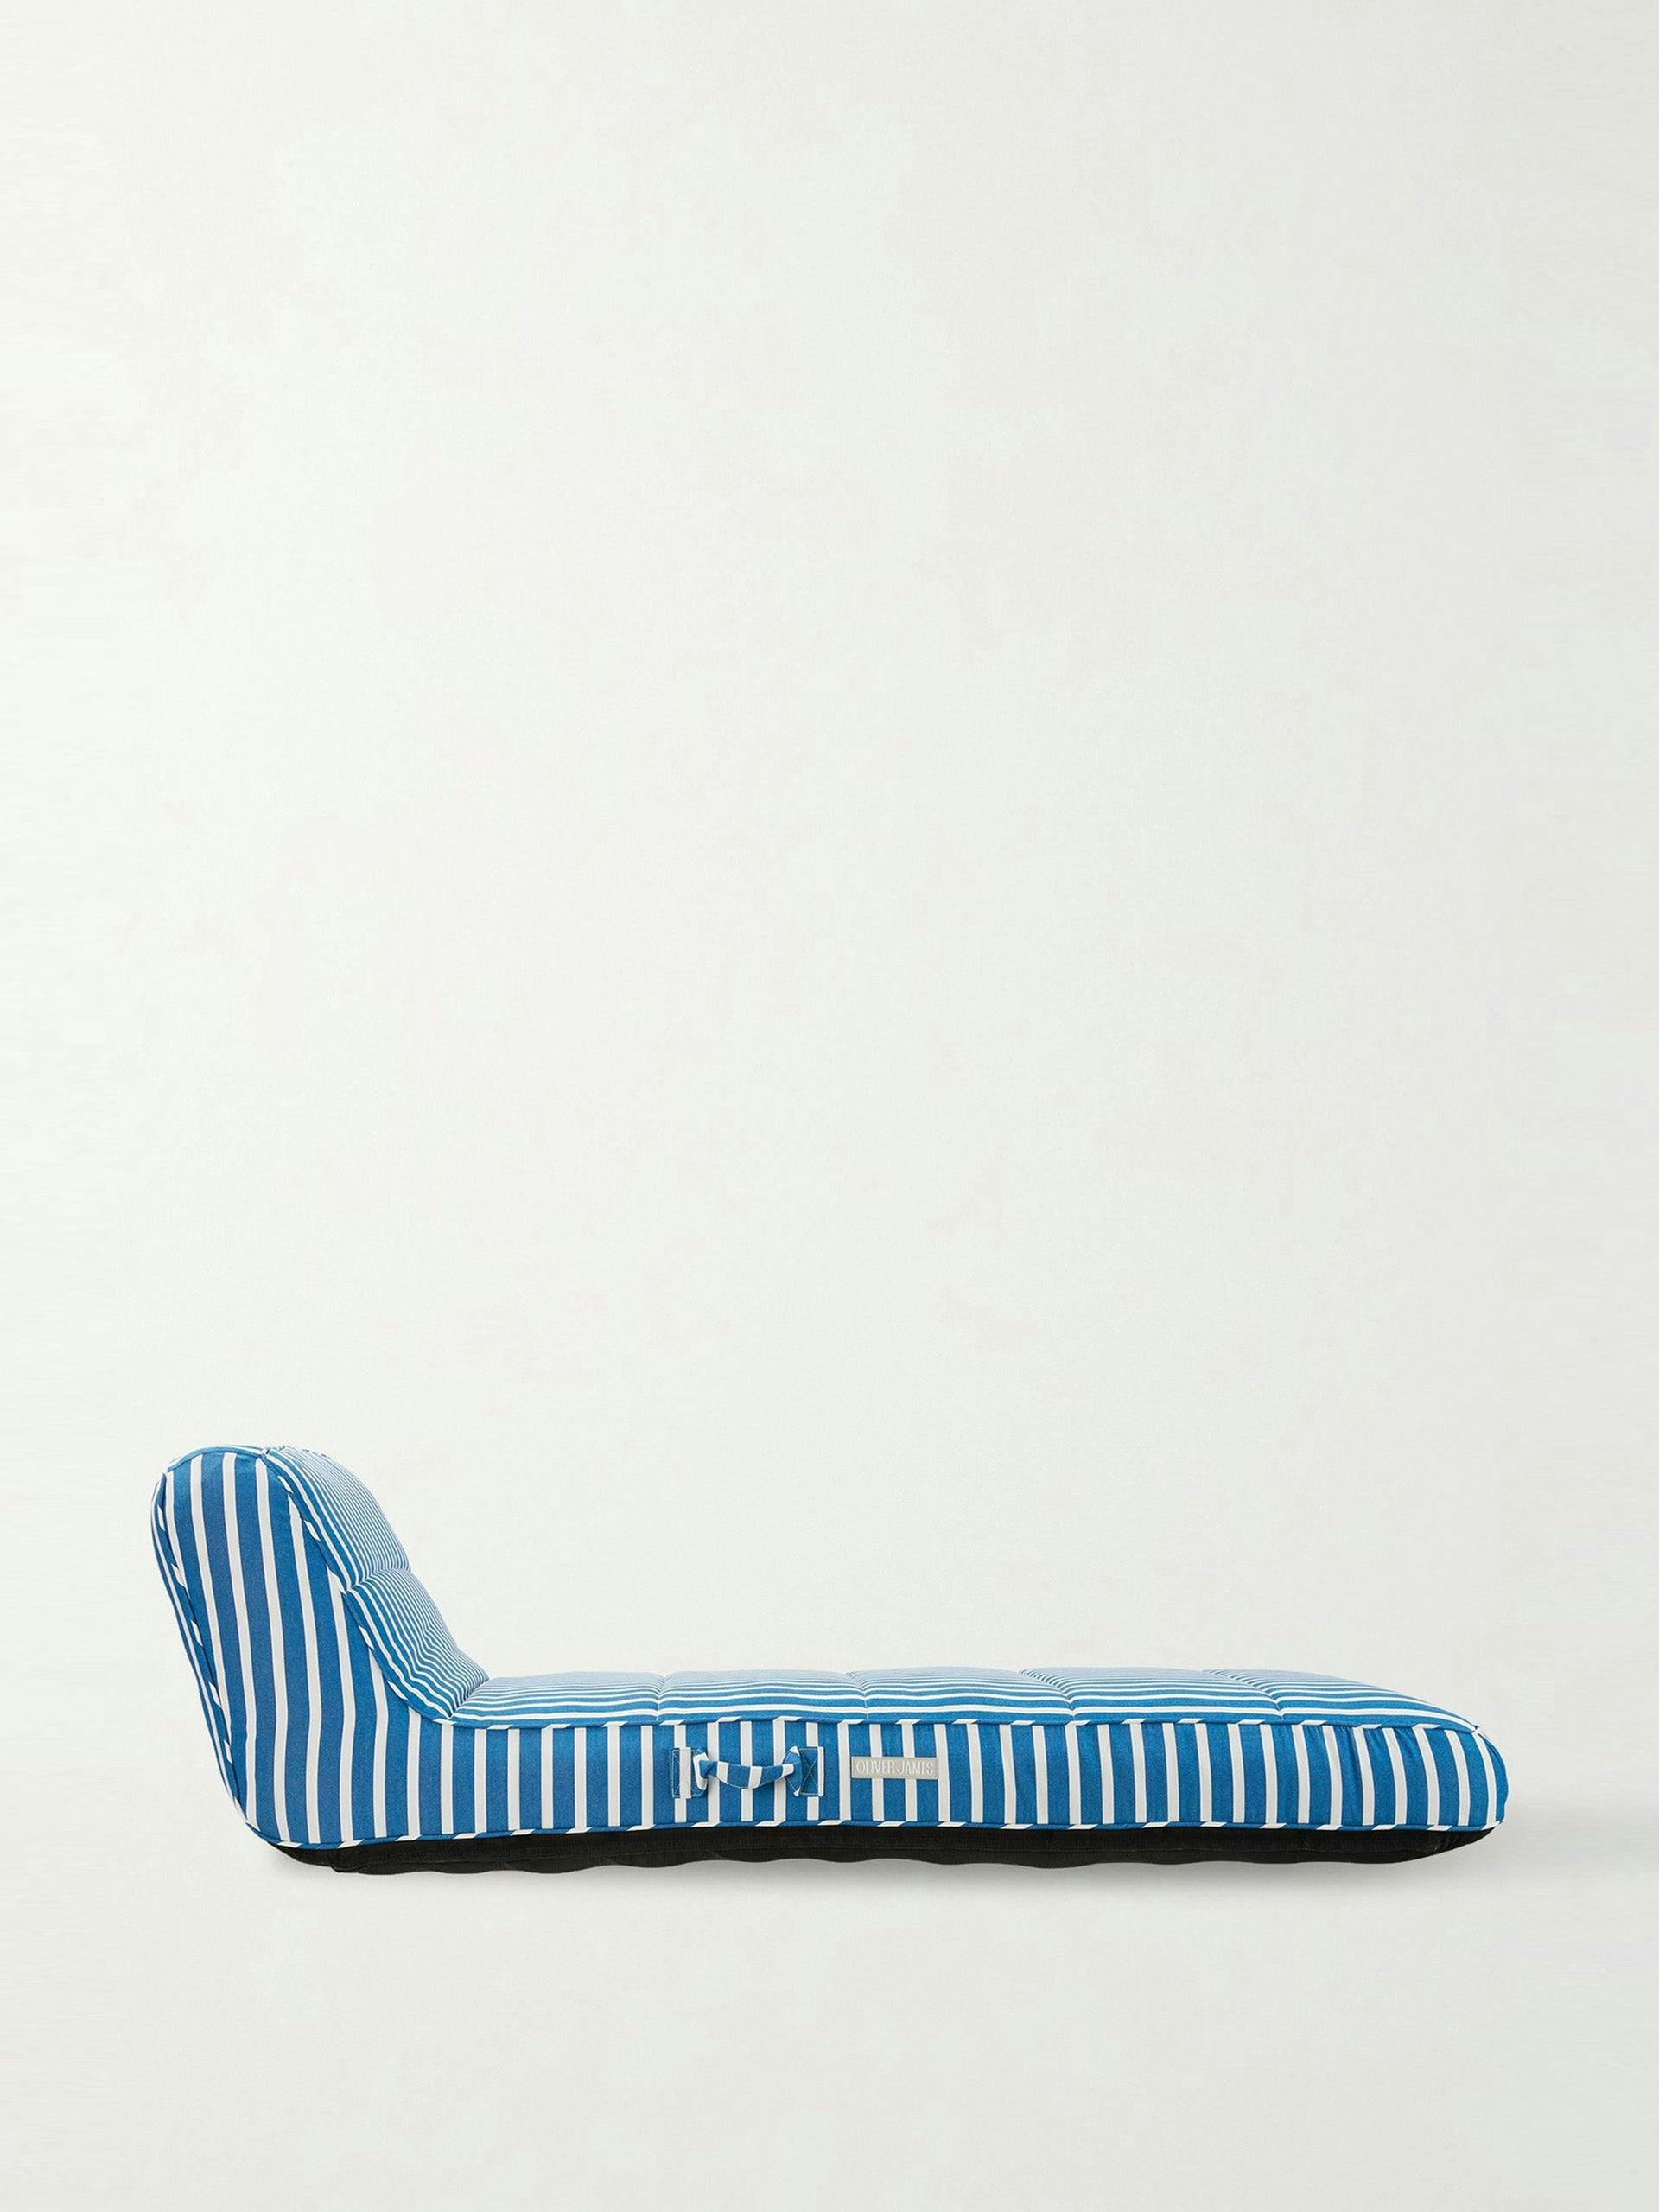 Striped upholstered pool lounger